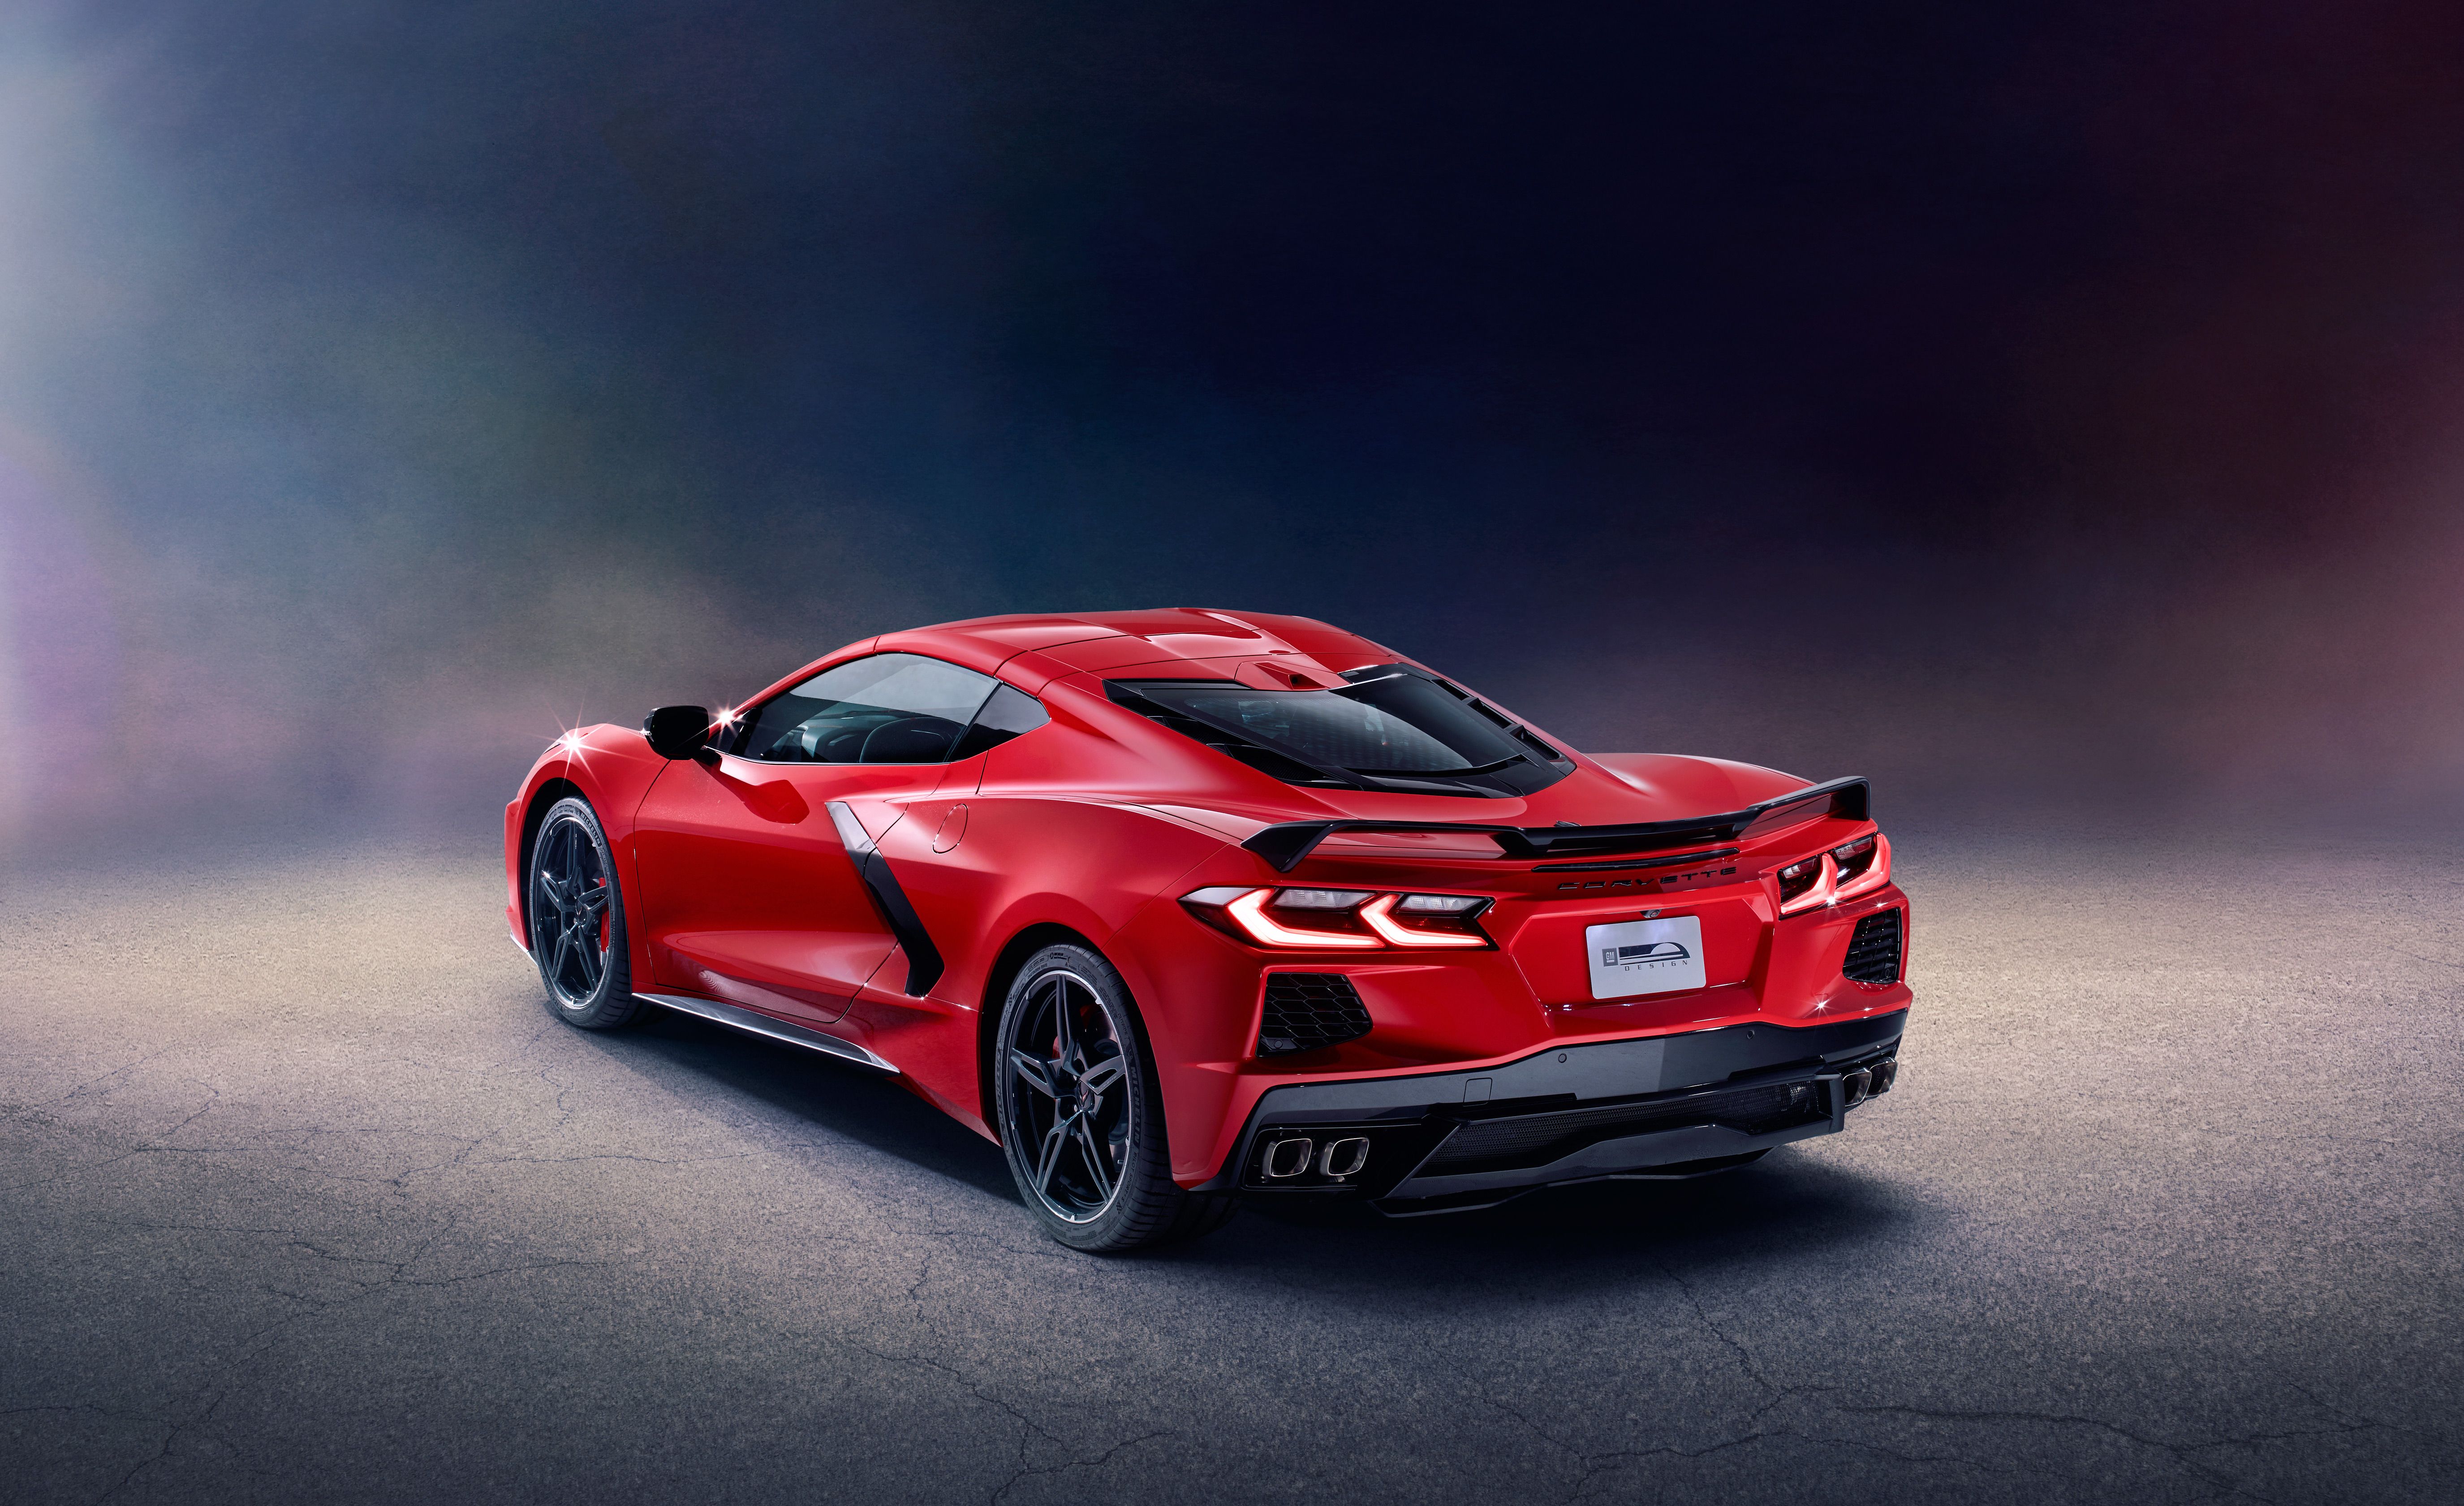 2020 Chevy Corvette C8 Official Price Starts at $59,995